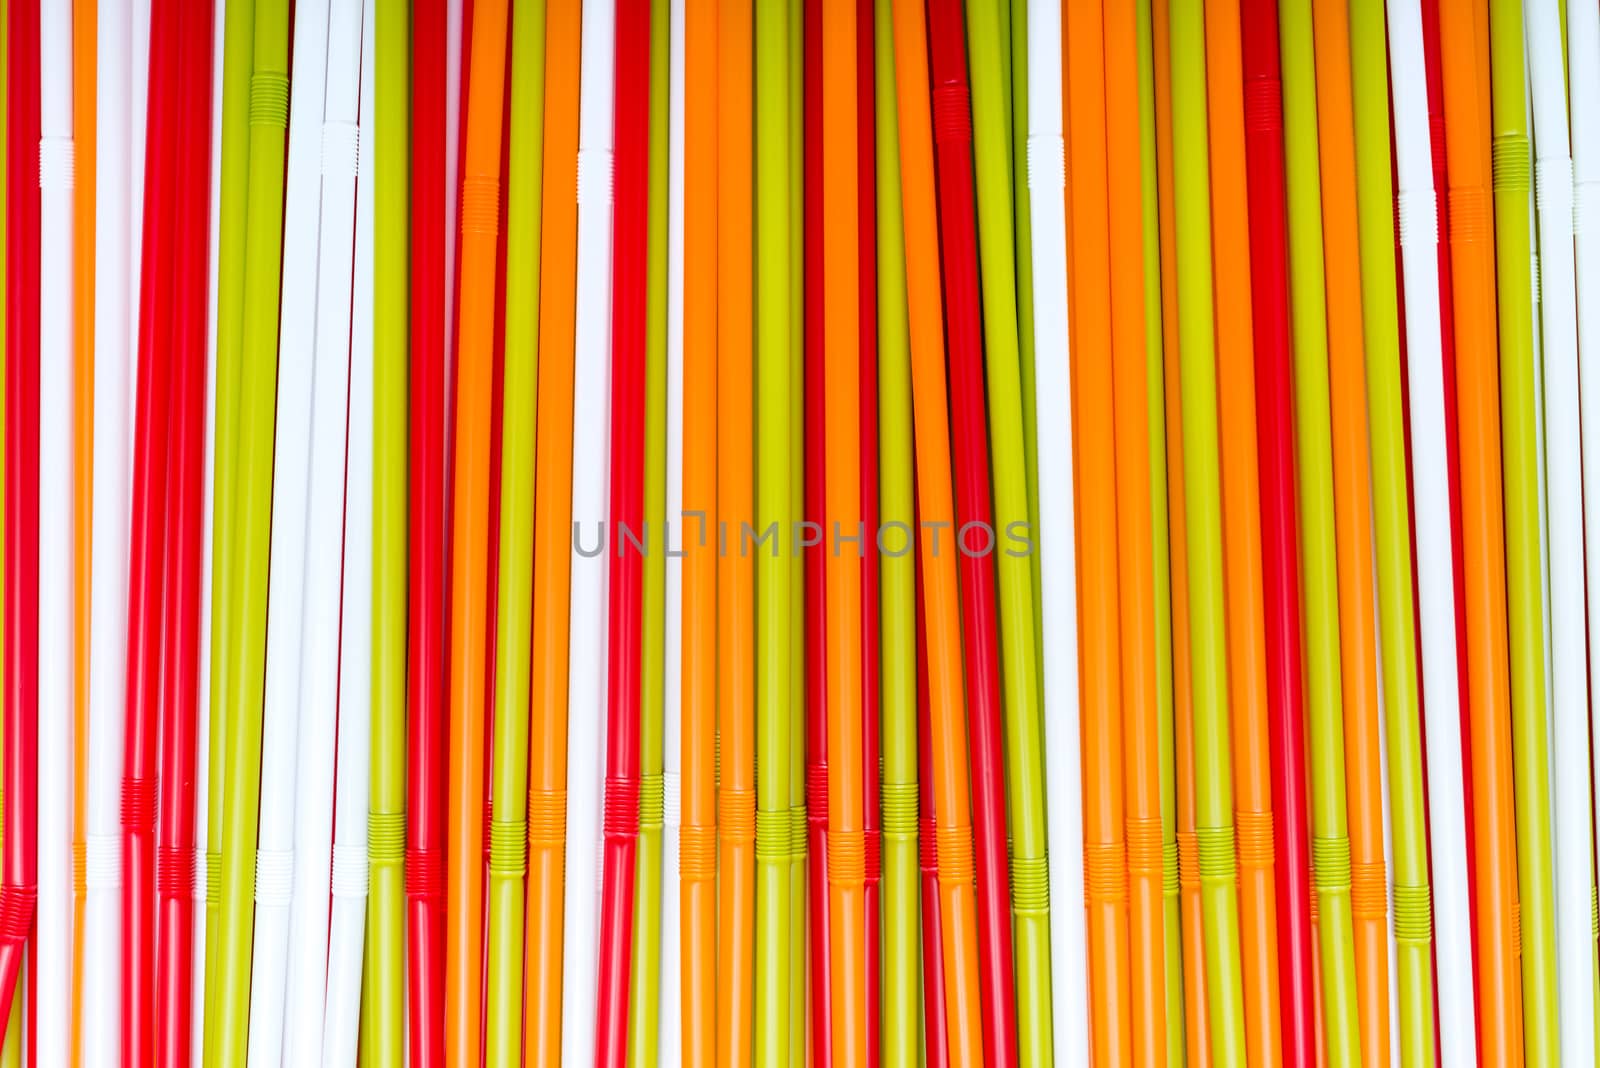 The colorful plastic tubes background and texture by DNKSTUDIO